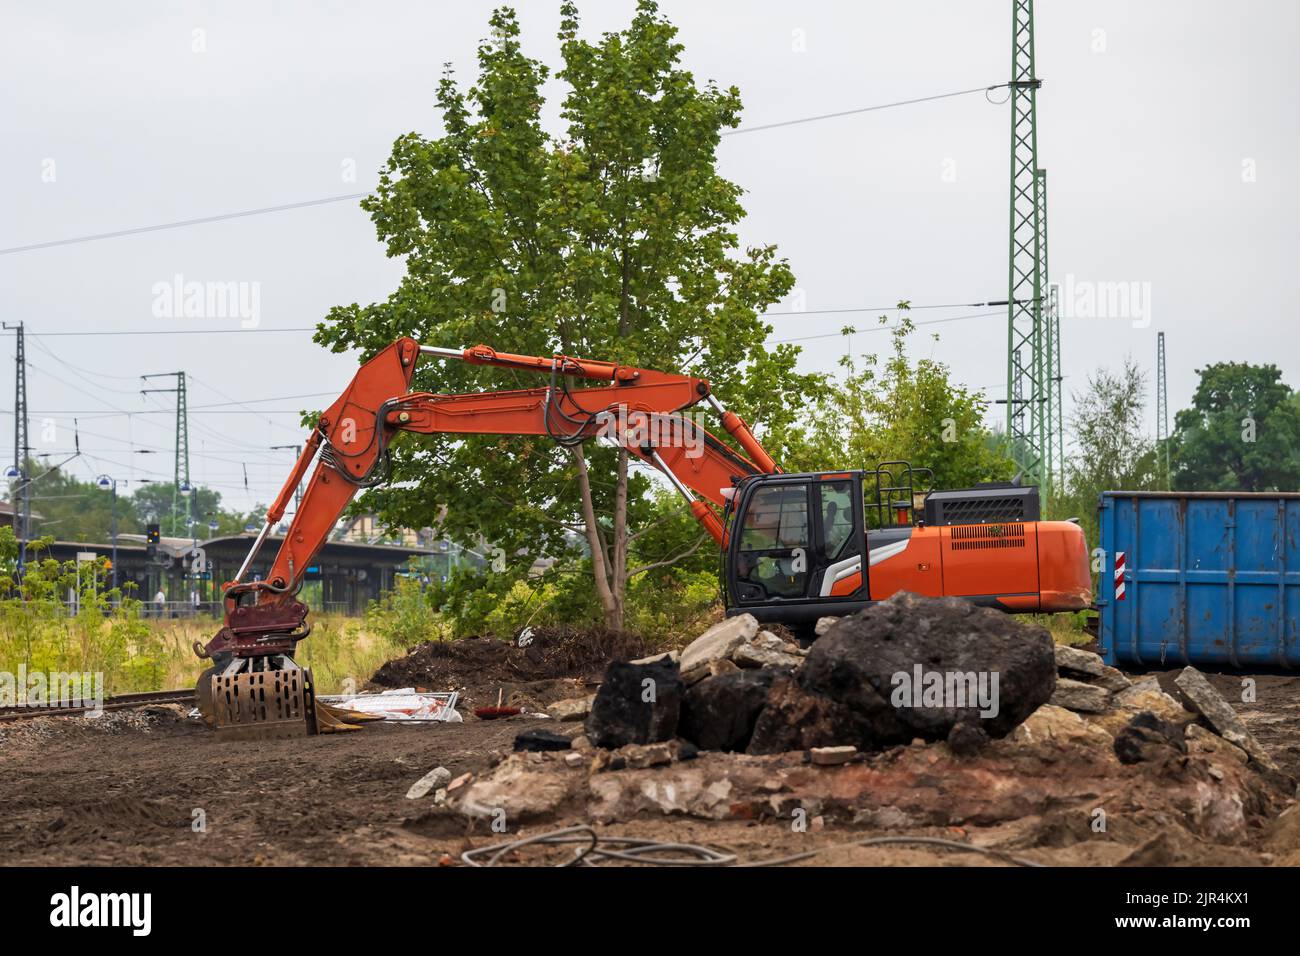 A parked excavator on a construction site Stock Photo